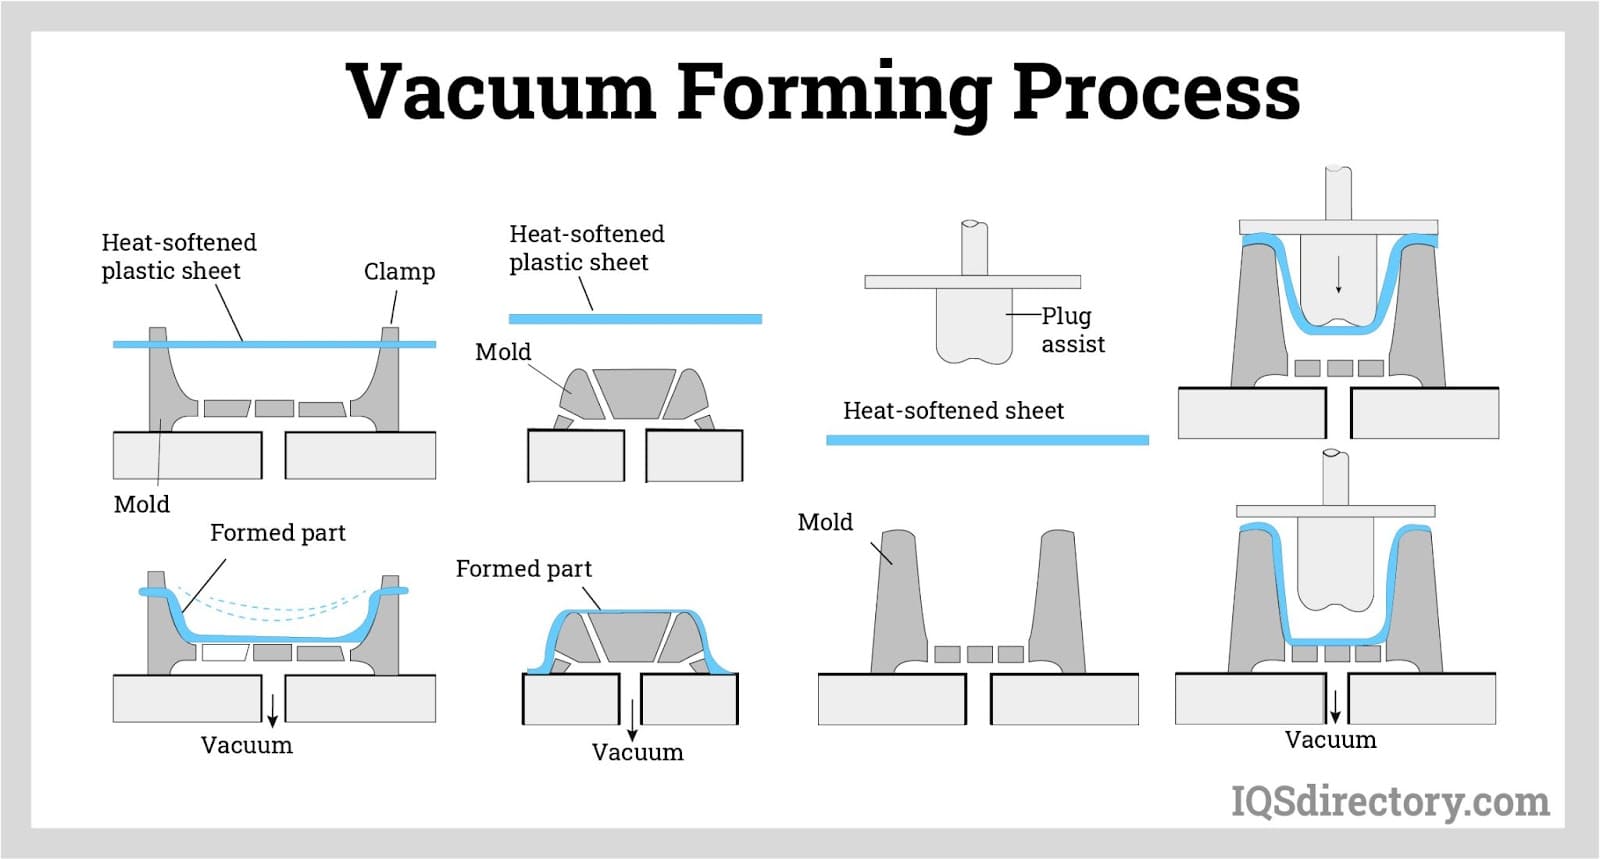 What are the different types of vacuum forming